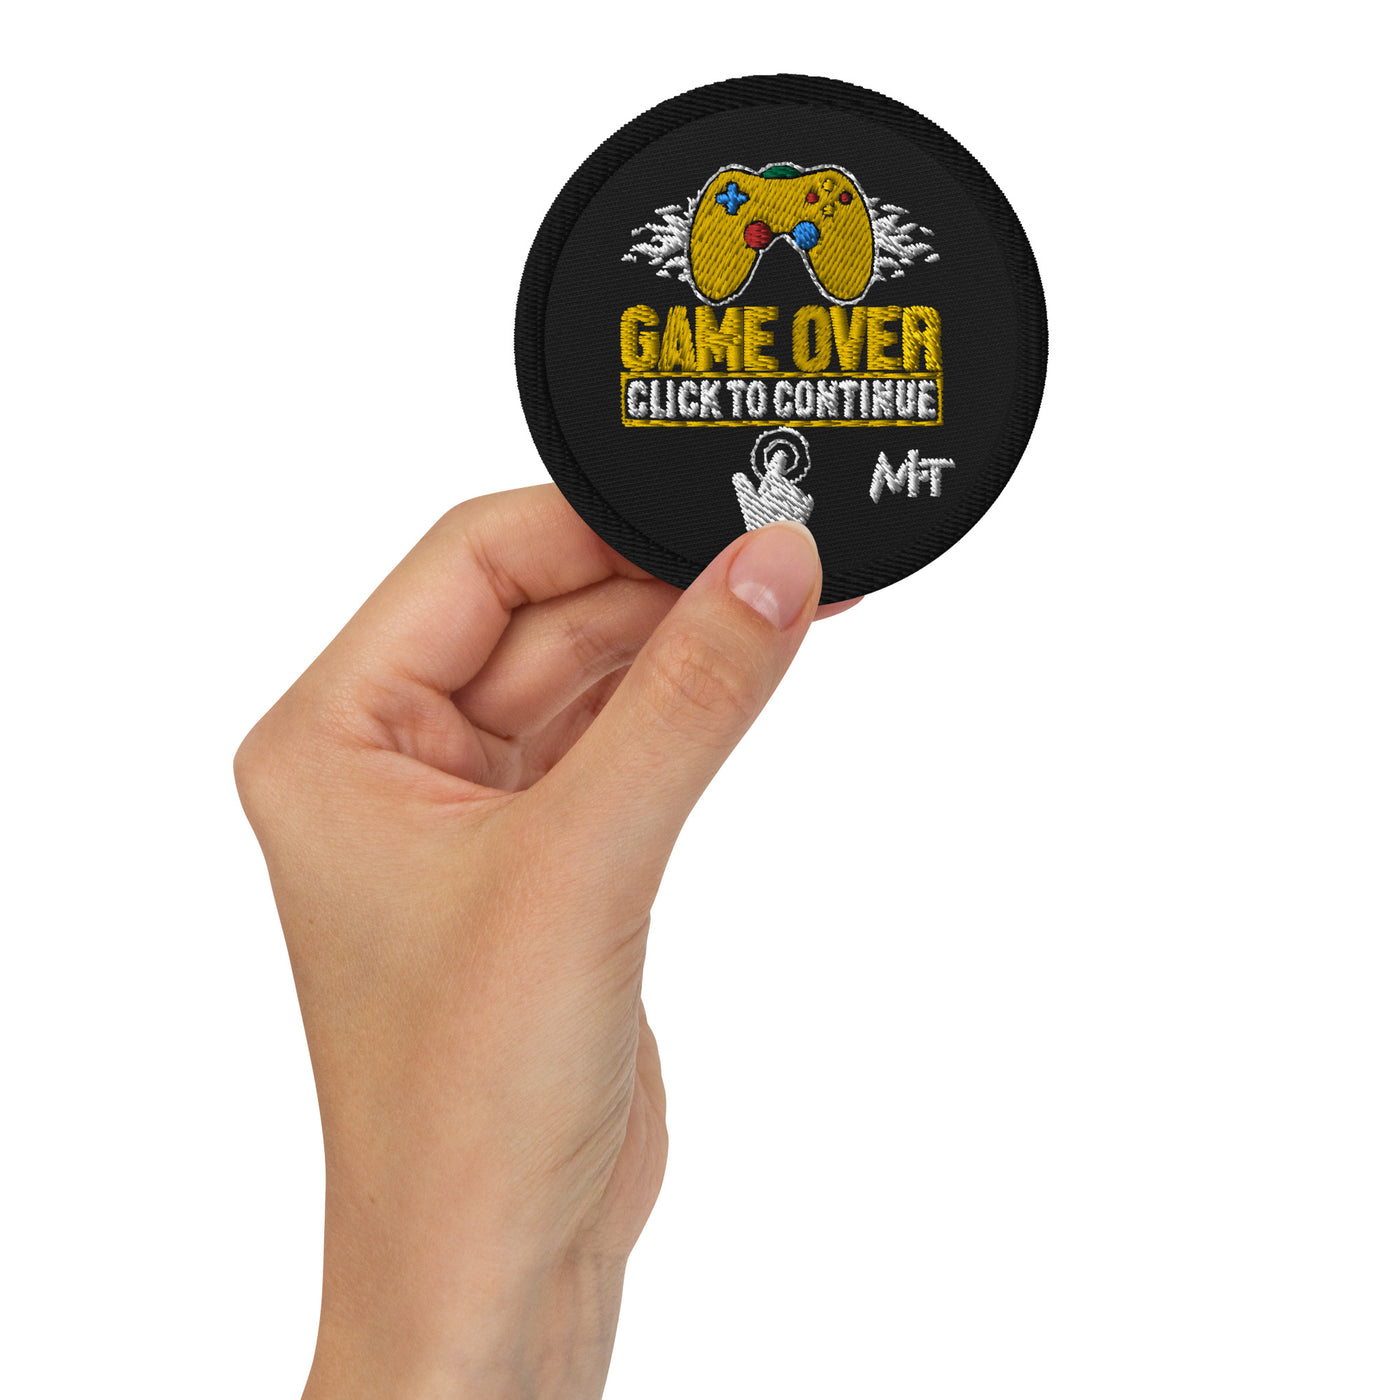 Game Over Click to continue - Embroidered patches